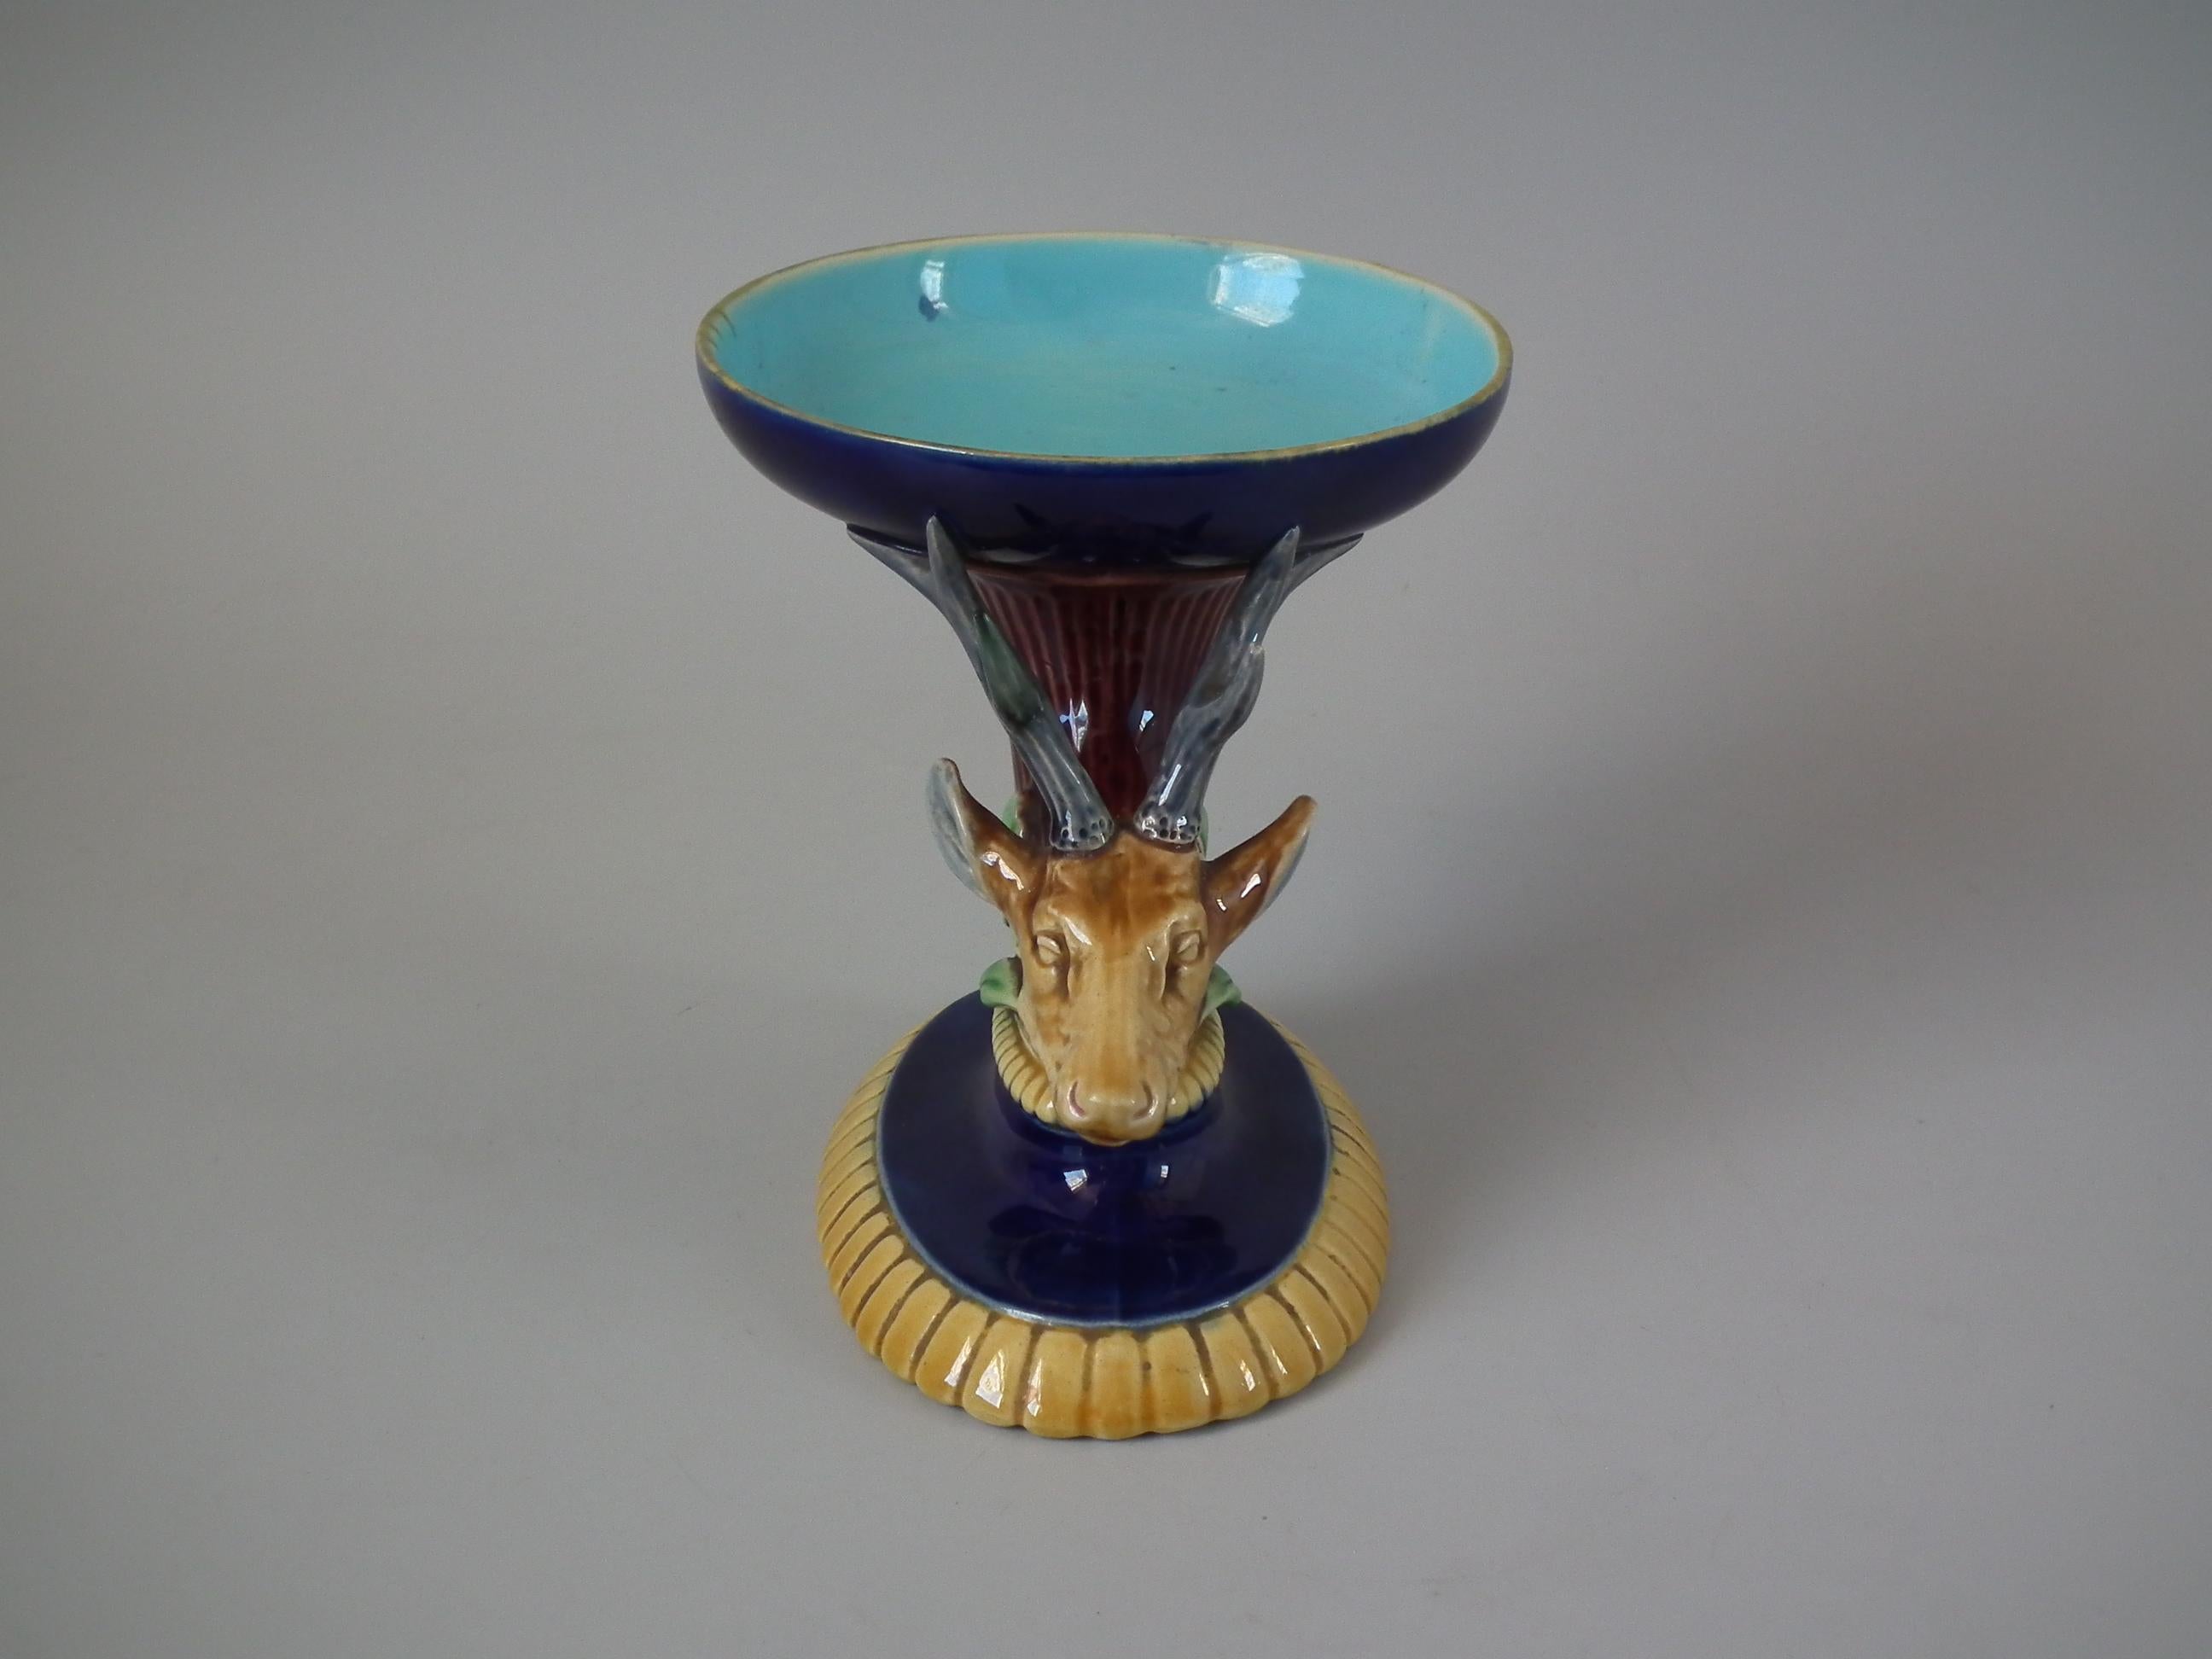 Minton Majolica compote which features a stag's head. Colouration: cobalt blue, turquoise, ochre, are predominant.